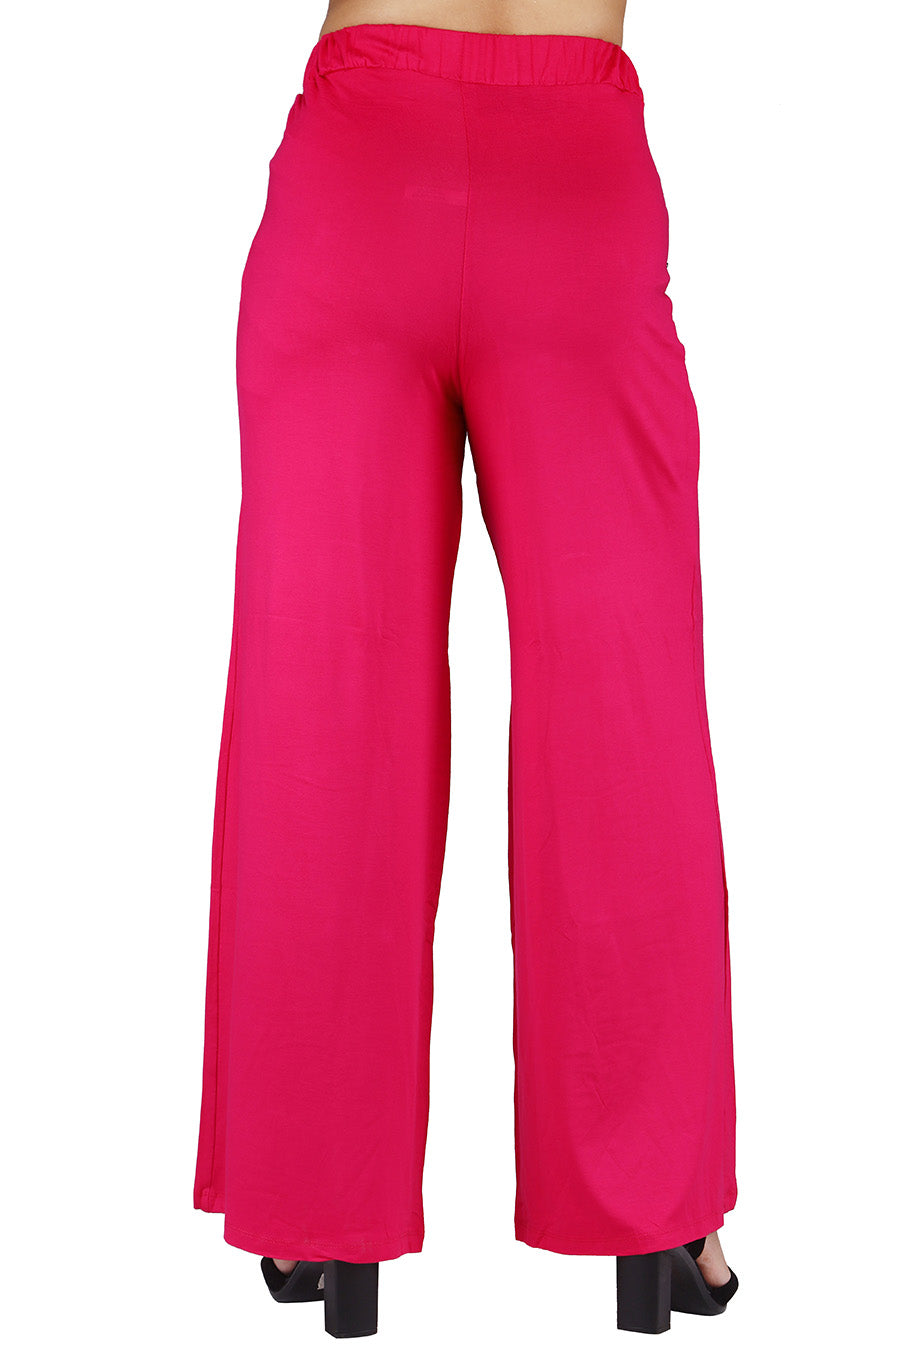 Comfort Lady Regular Fit Palazzos - Comfort Lady Private Limited